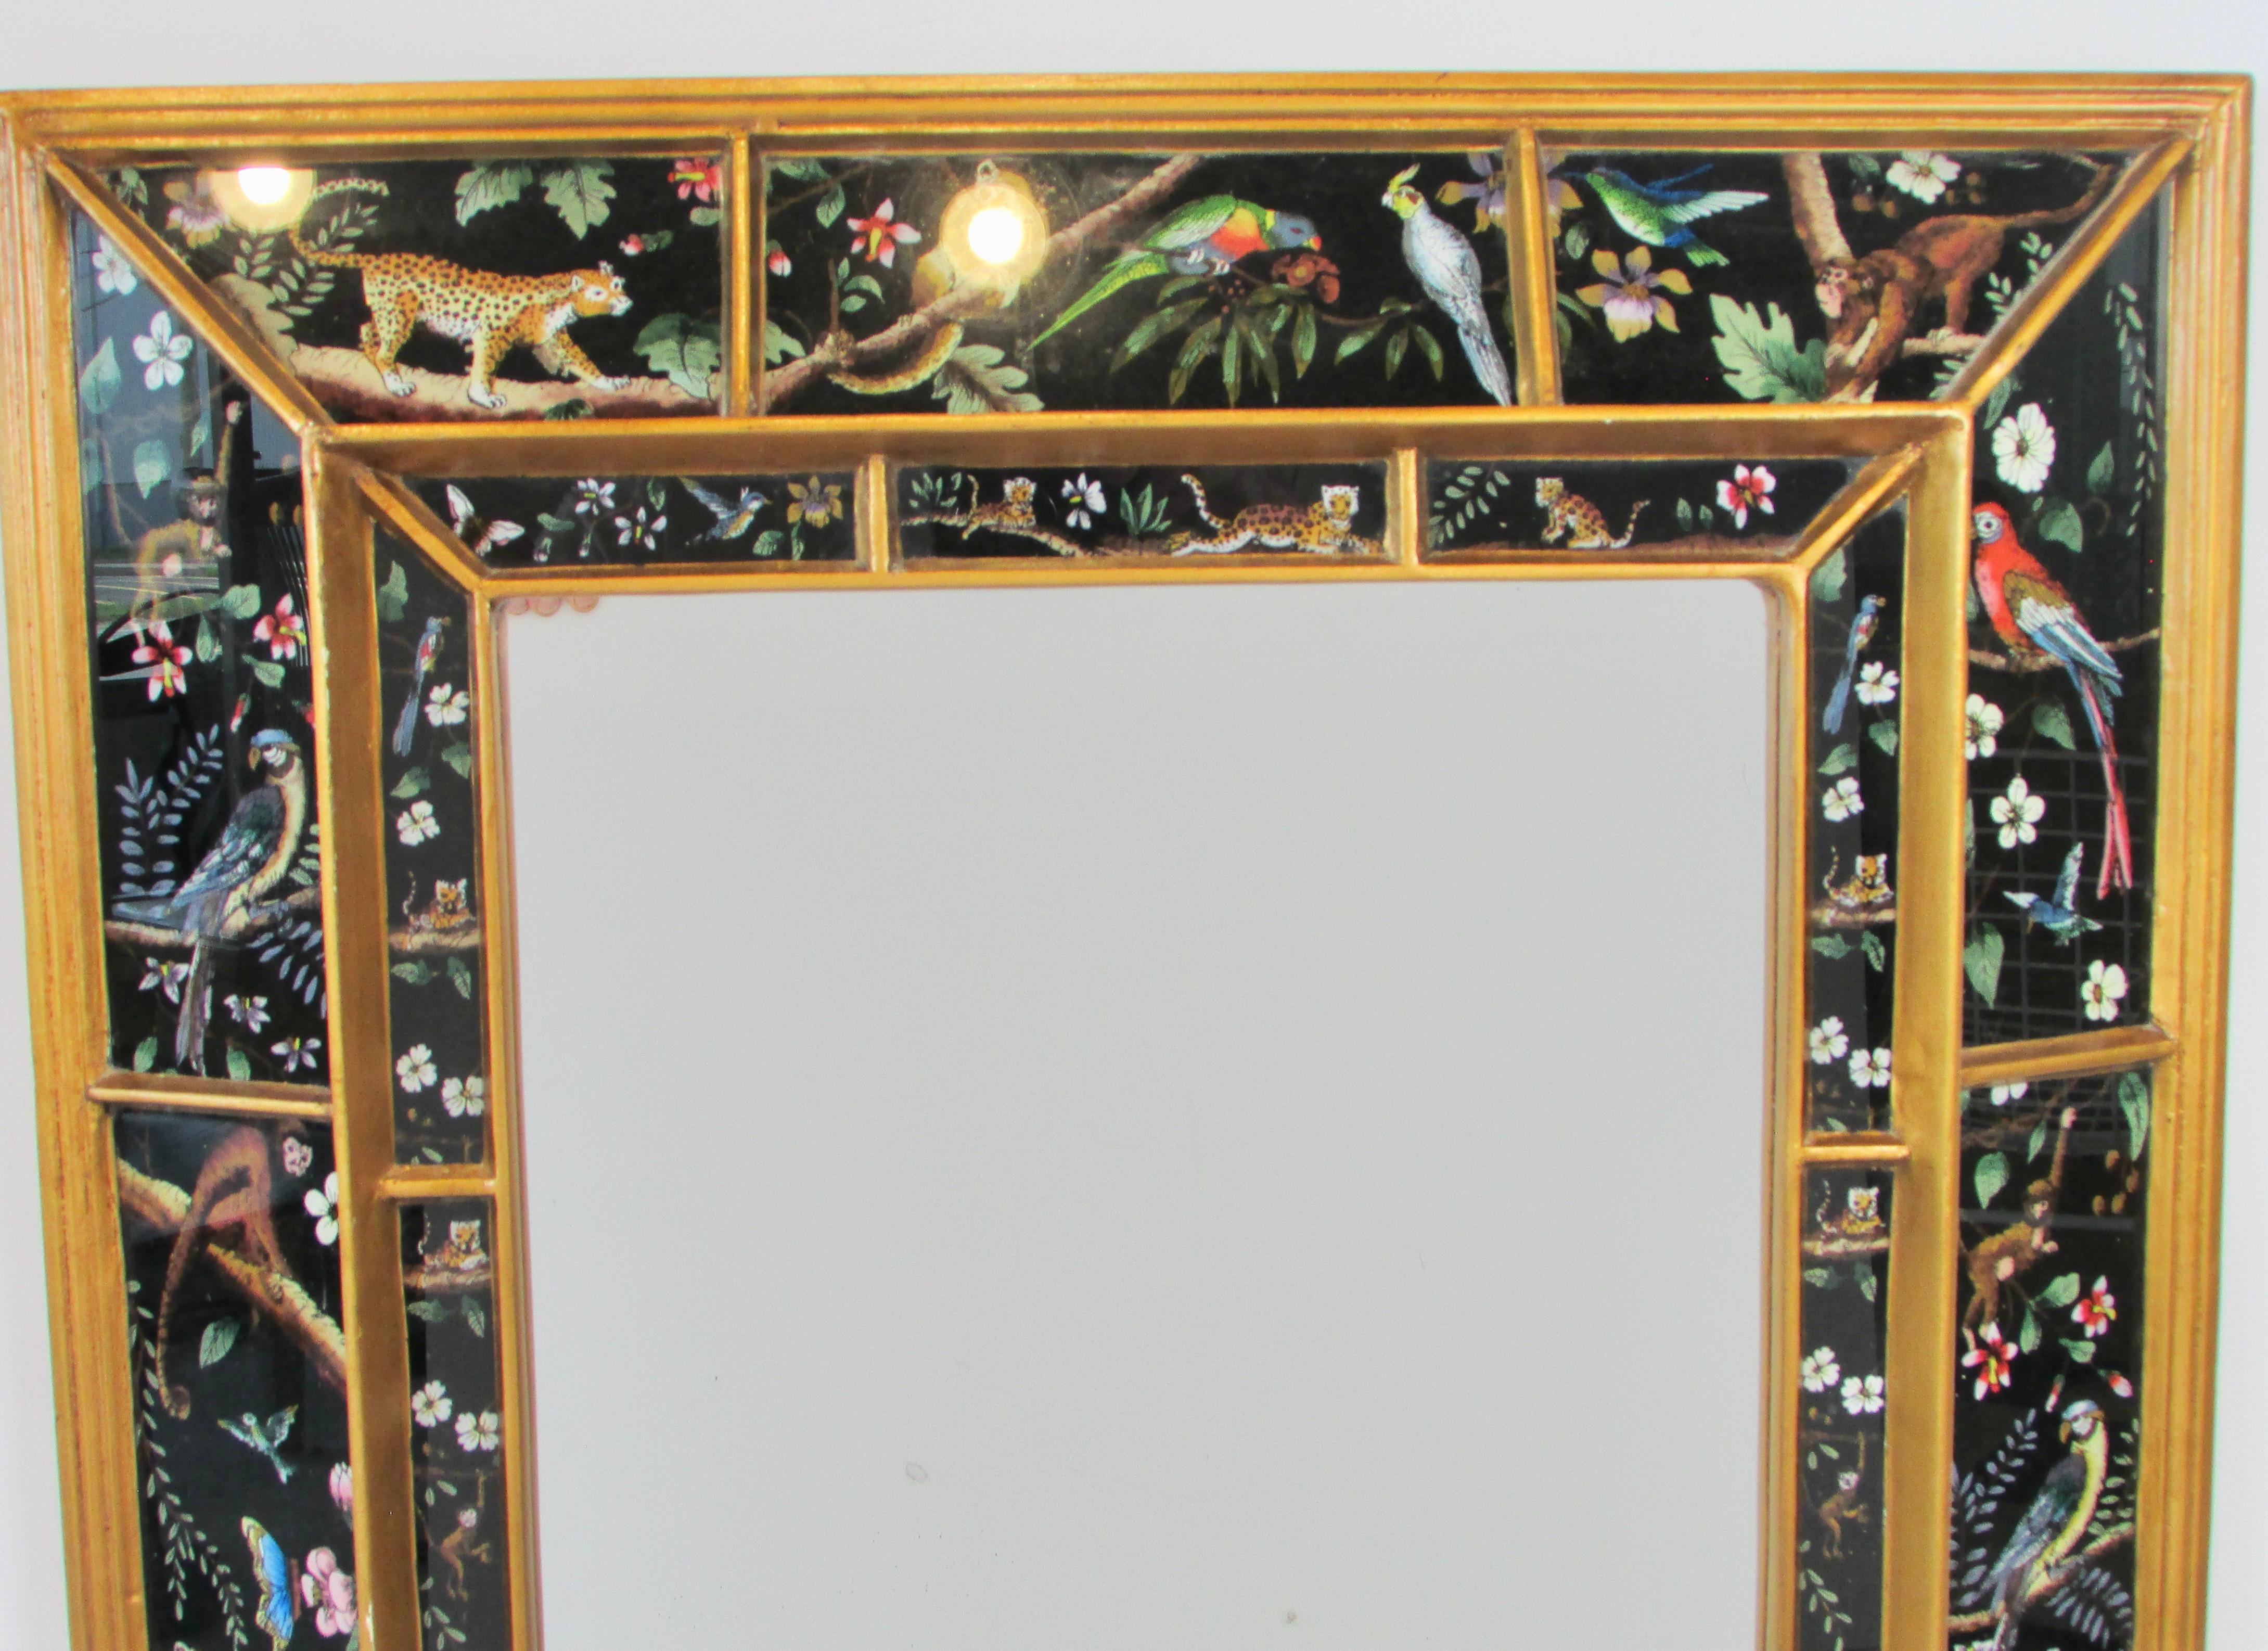 Late 20th Century Wall Mirror with Vivid Exotic Panther Tiger Monkey Birds Butterfly Images